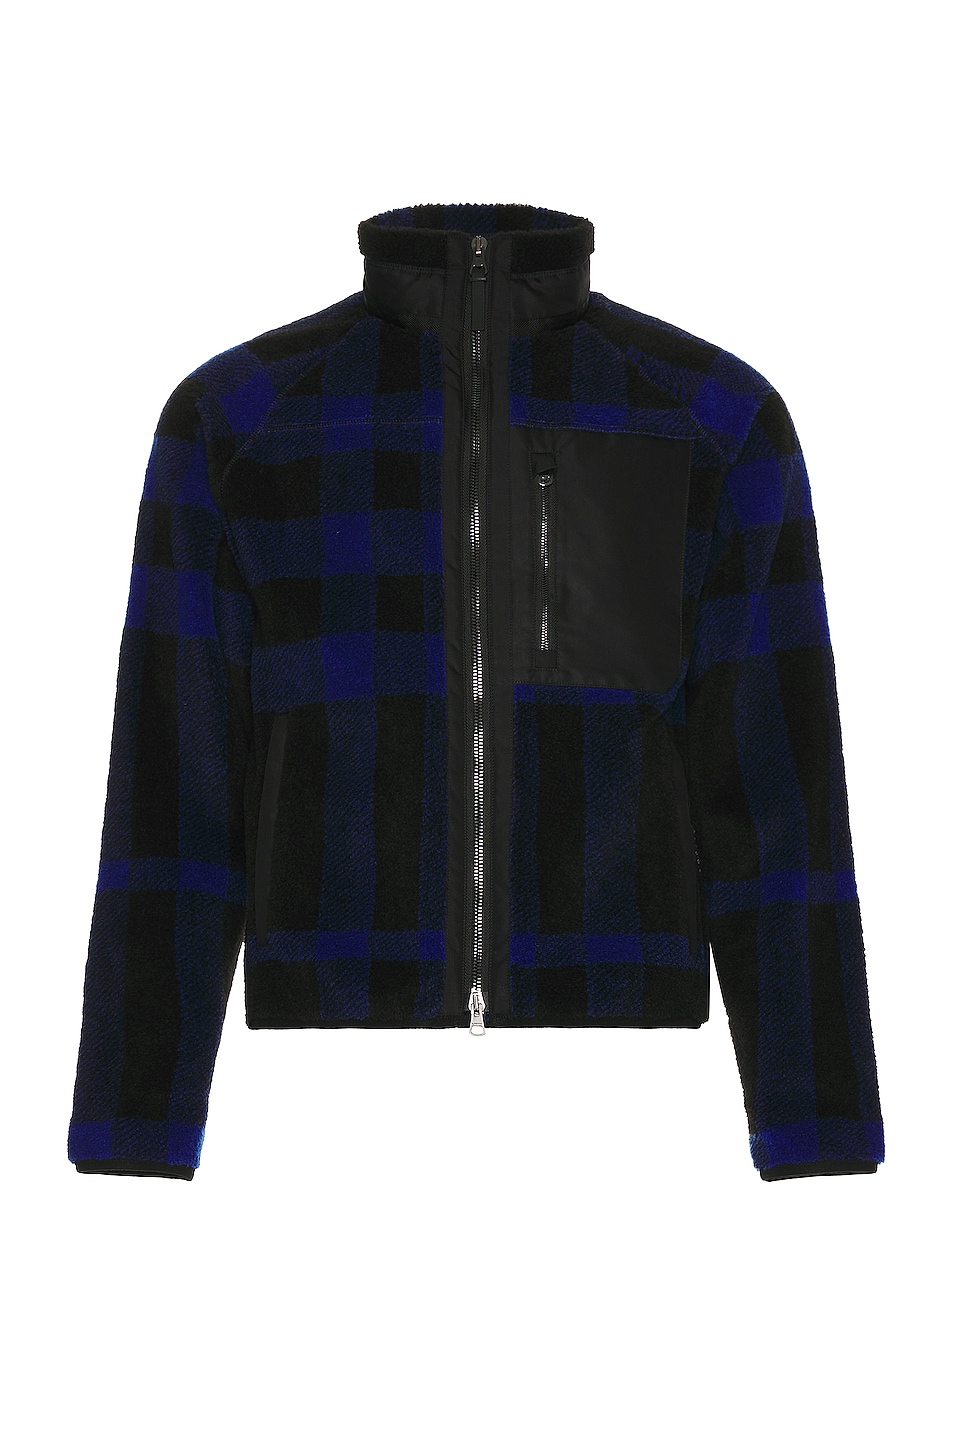 Image 1 of Burberry Dorian Jacket in Deep Royal Blue